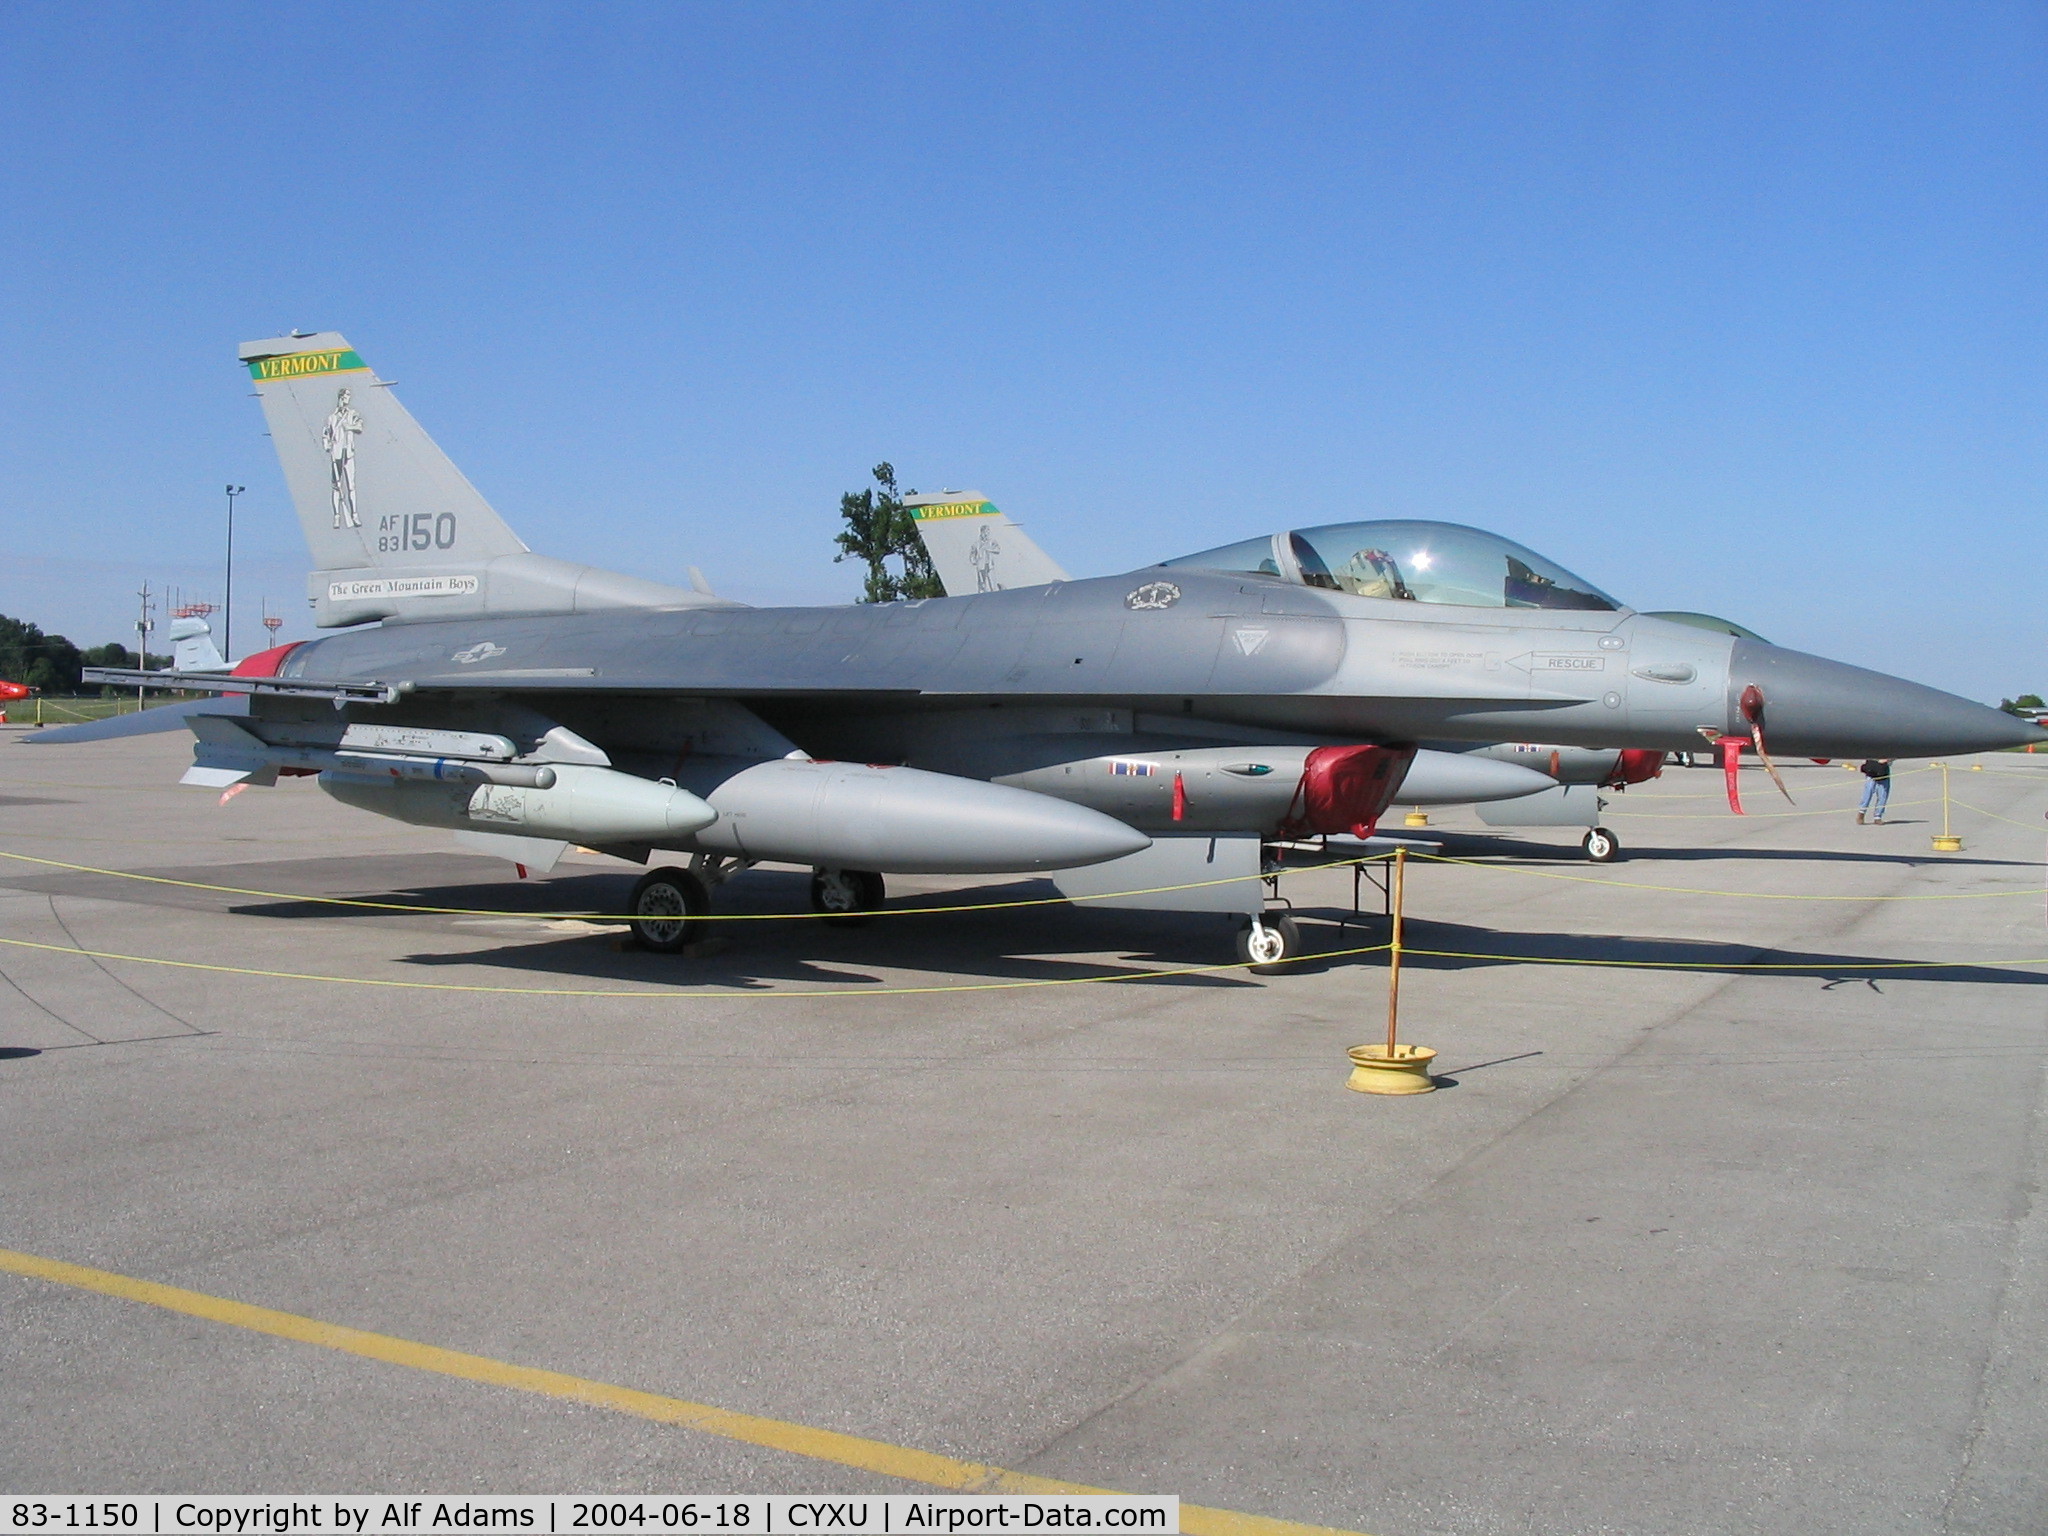 83-1150, 1983 General Dynamics F-16C Fighting Falcon C/N 5C-33, Displayed at the airshow at London, Ontario, Canada in 2004.